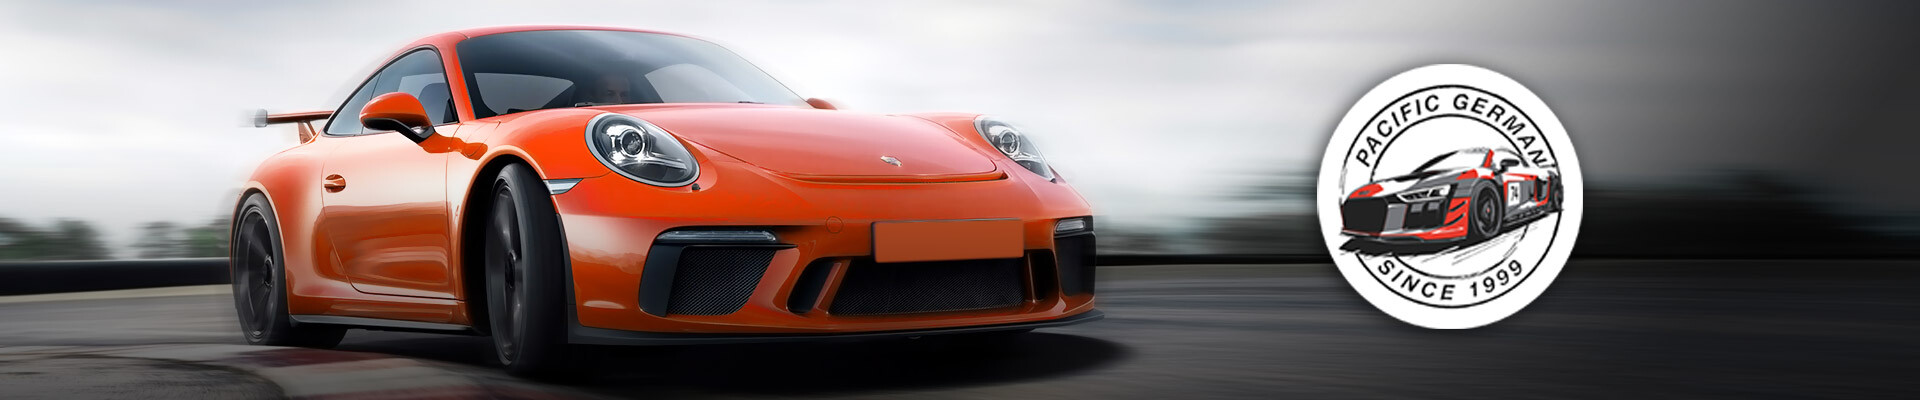 Porsche Repair in Laguna Hills, CA by Pacific German a leading Porsche repair specialist in California specializing in Porsche repair, maintenance, performance tuning and service.